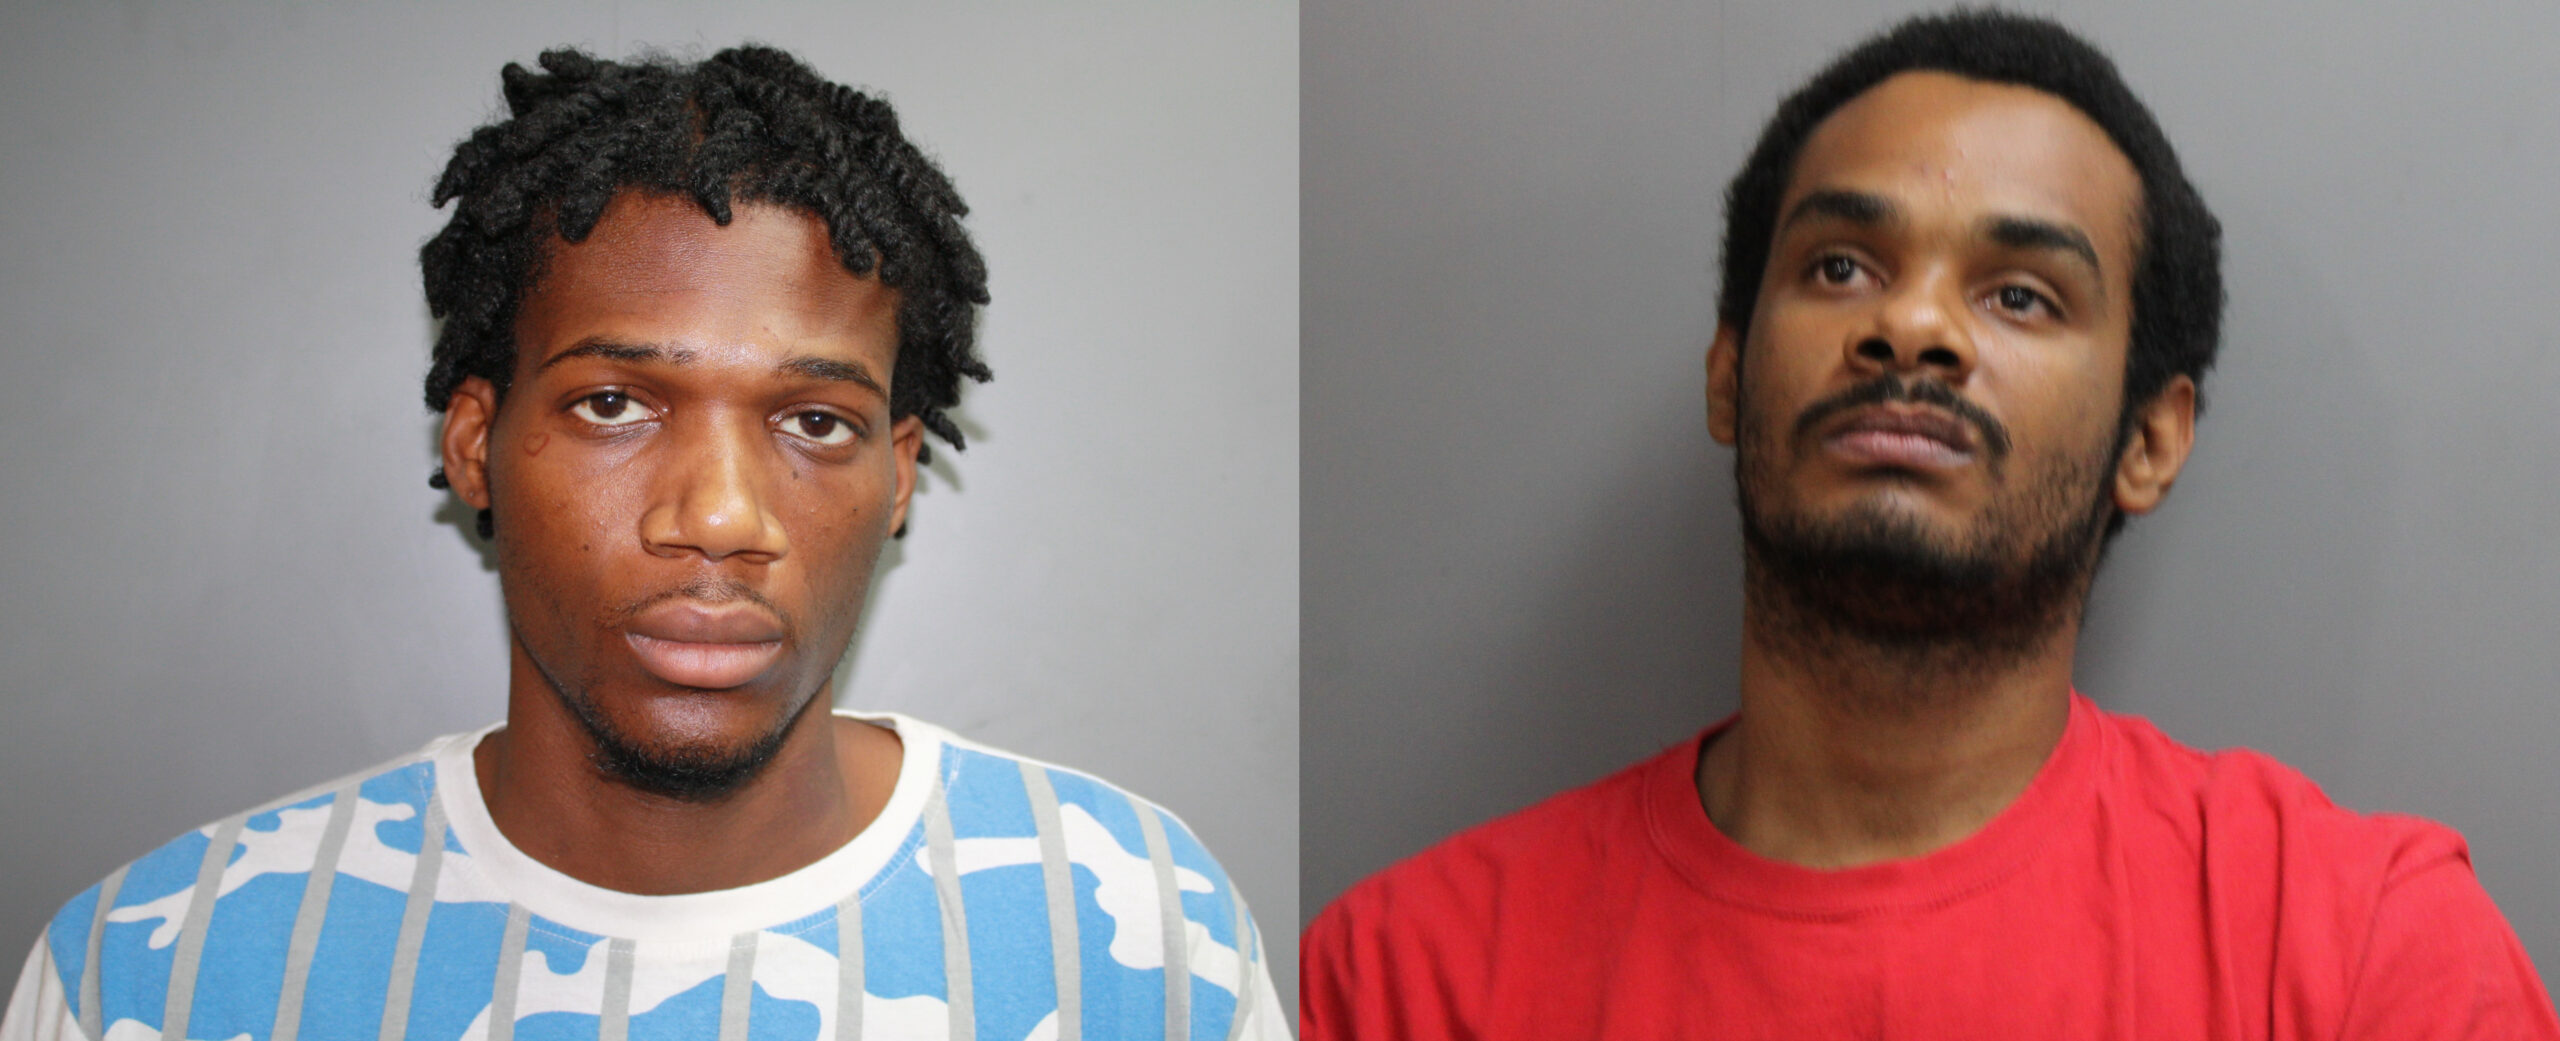 2 St. Croix Men Charged In Shooting Of Man At Marley Homes In December 2020